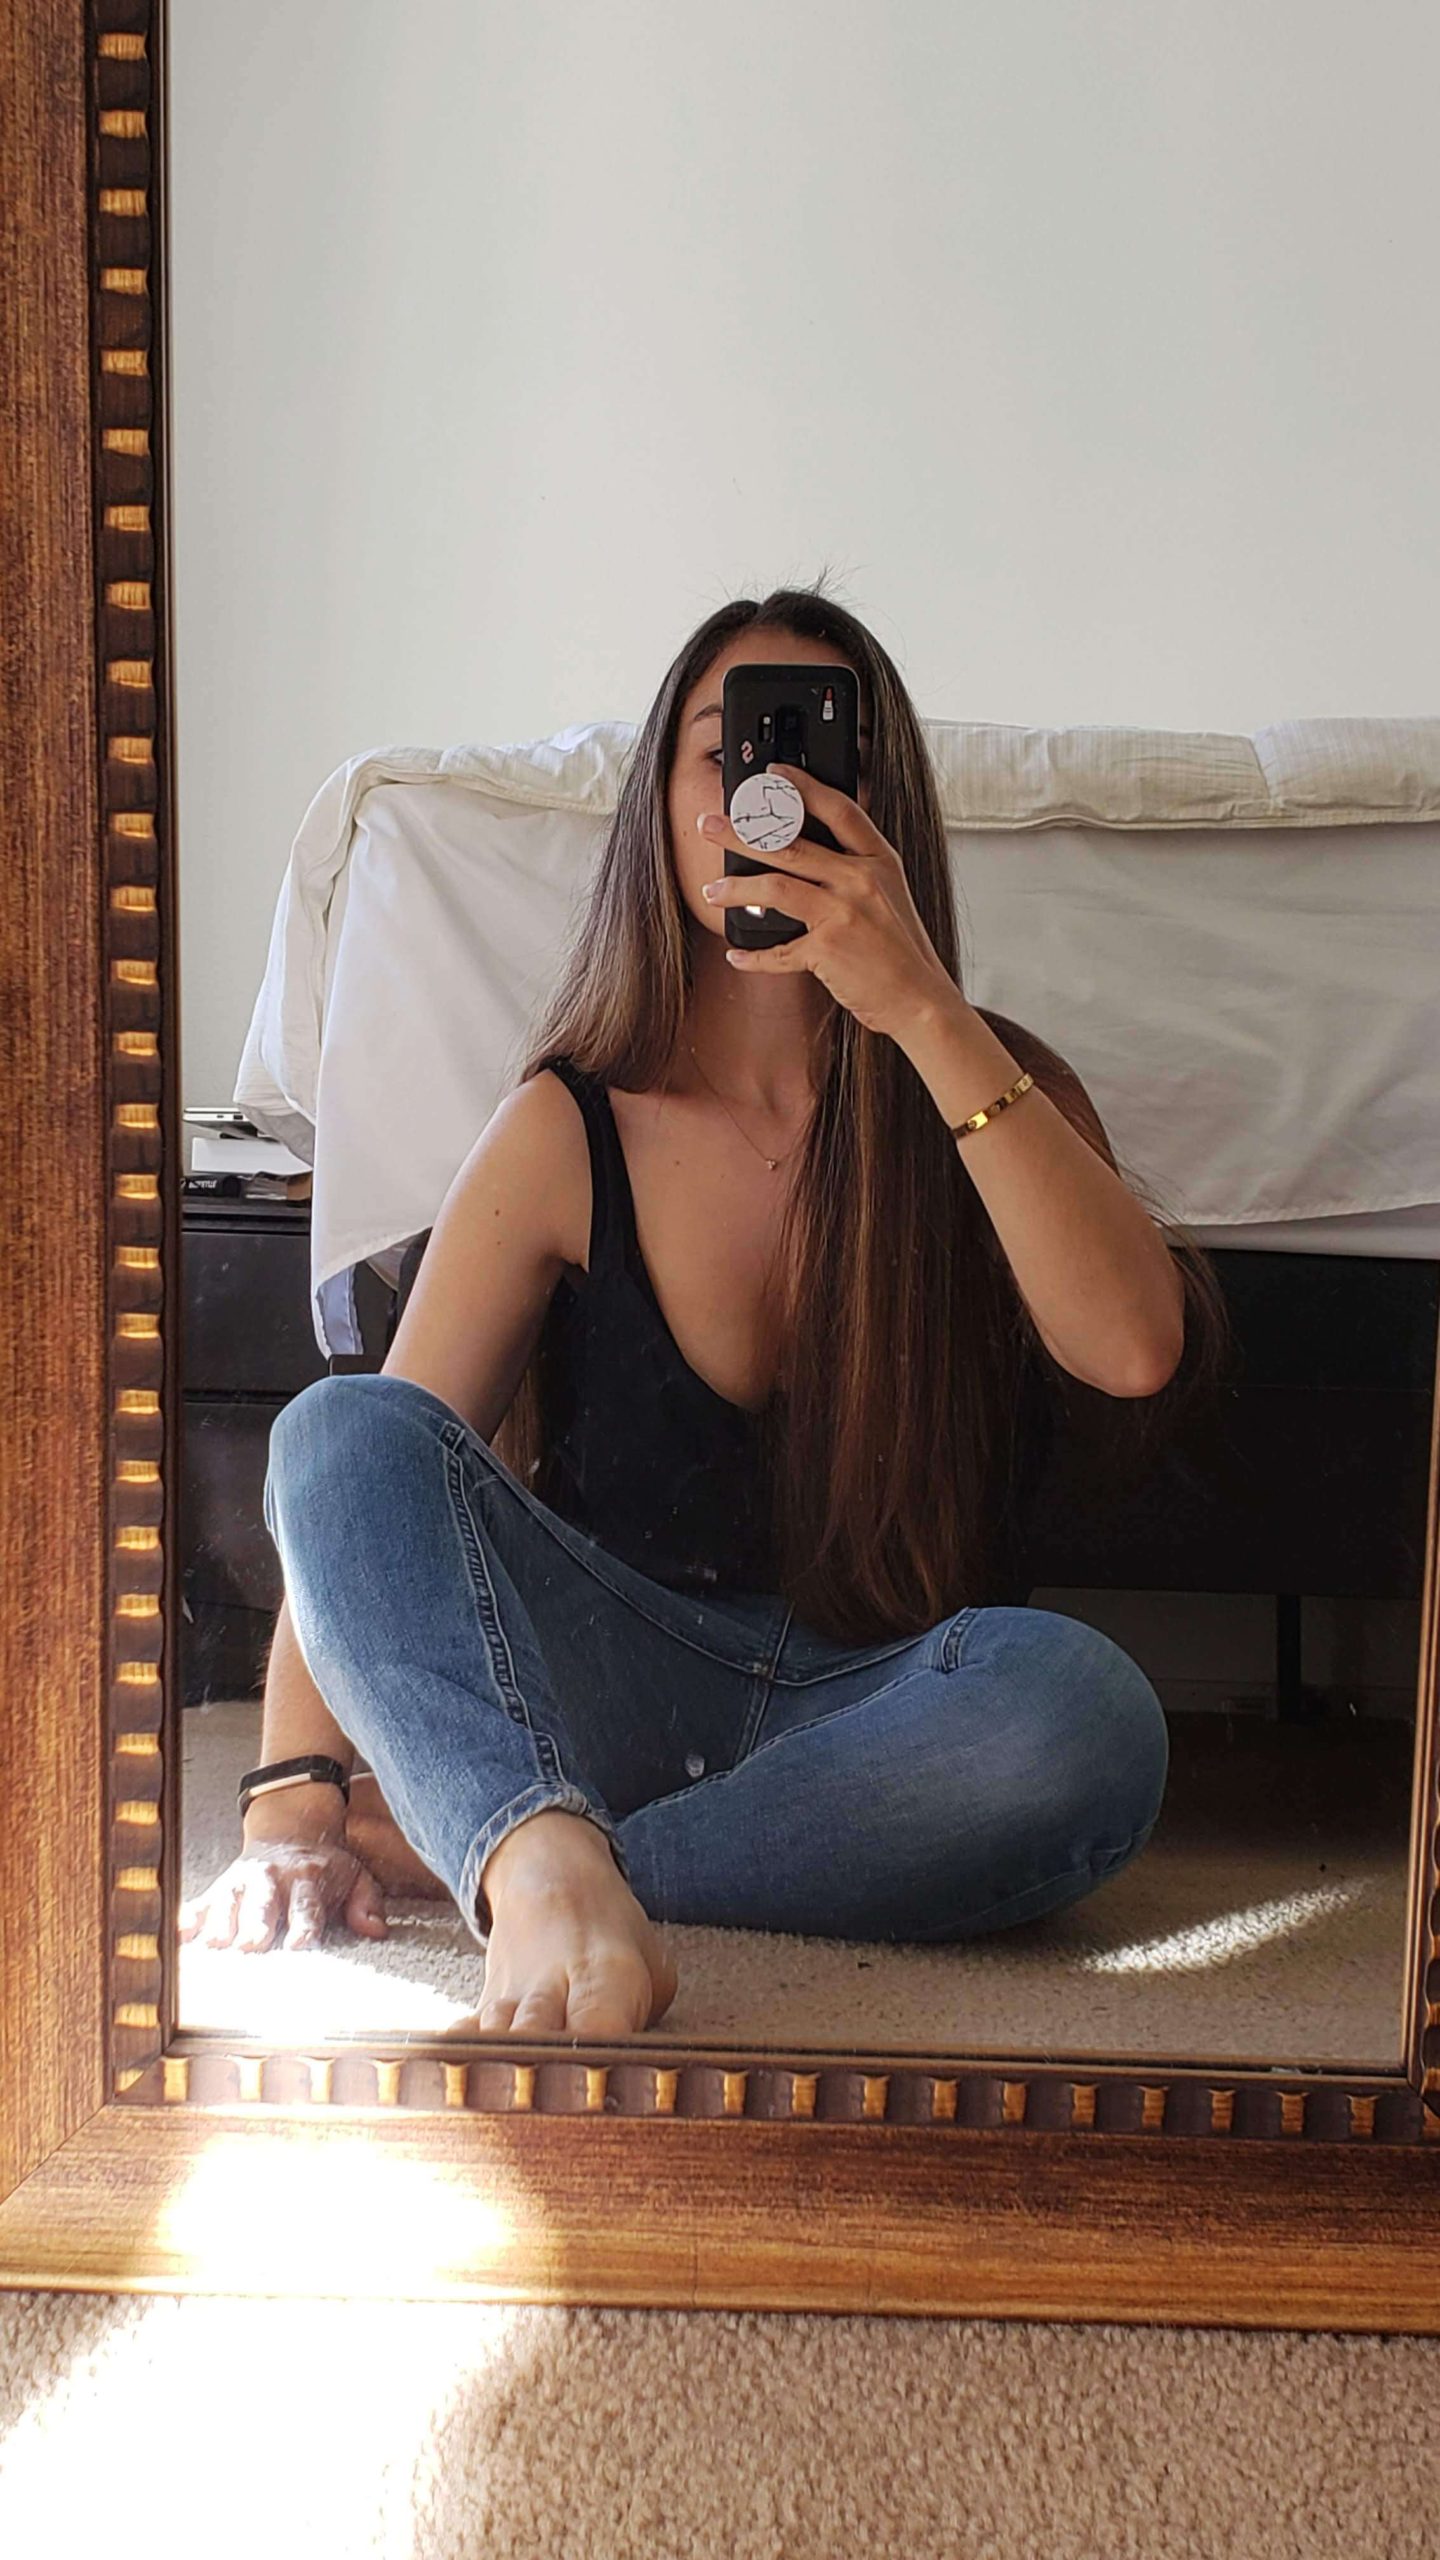 One of the thousands of unpublished mirror selfies on my phone | Sop the obsession with yourself